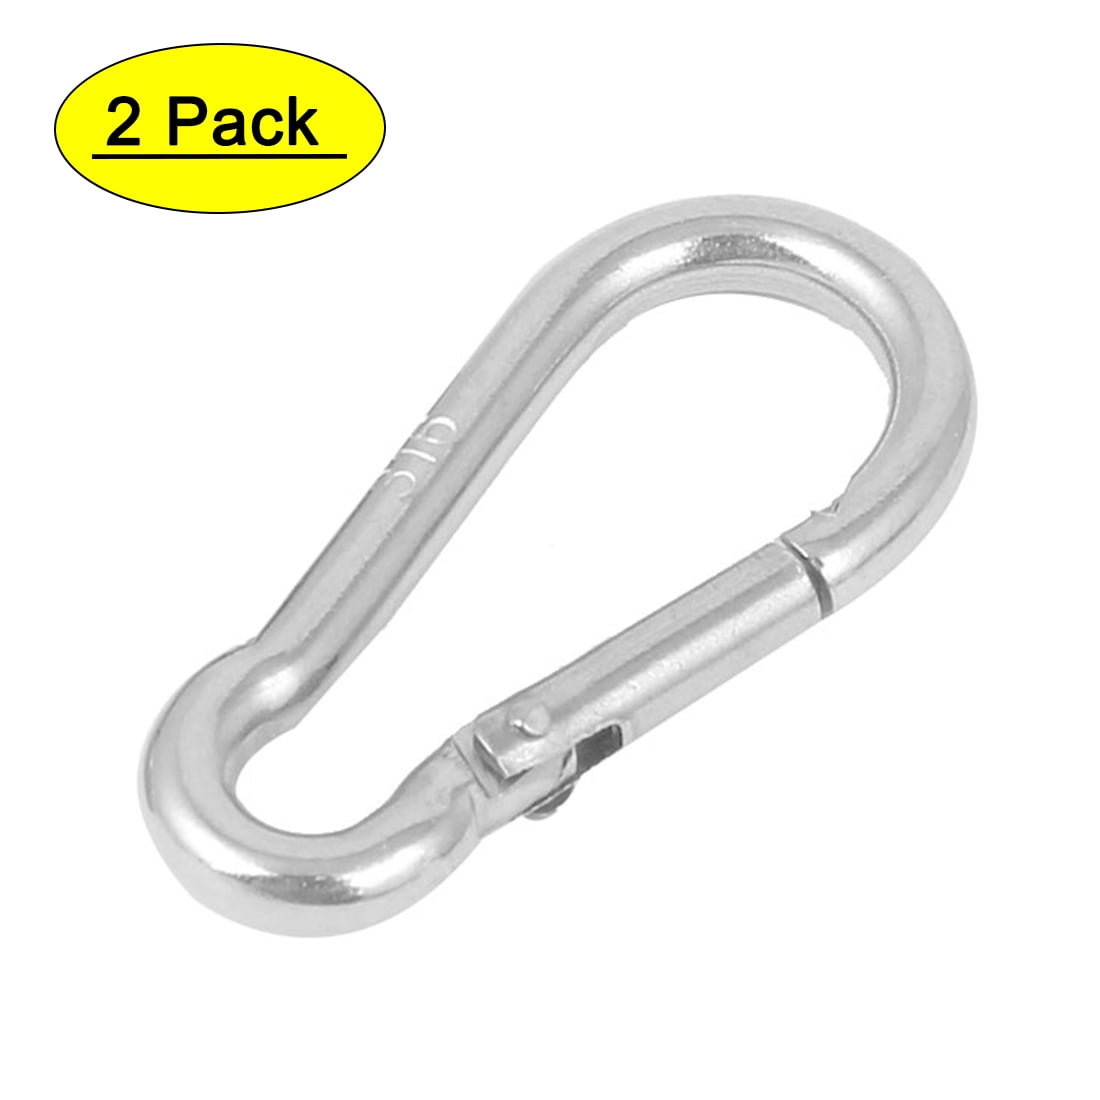 8mm STAINLESS STEEL 316 SNAP HOOK SAFETY CLIP CARABINER CLIMBING LOCK MNO 